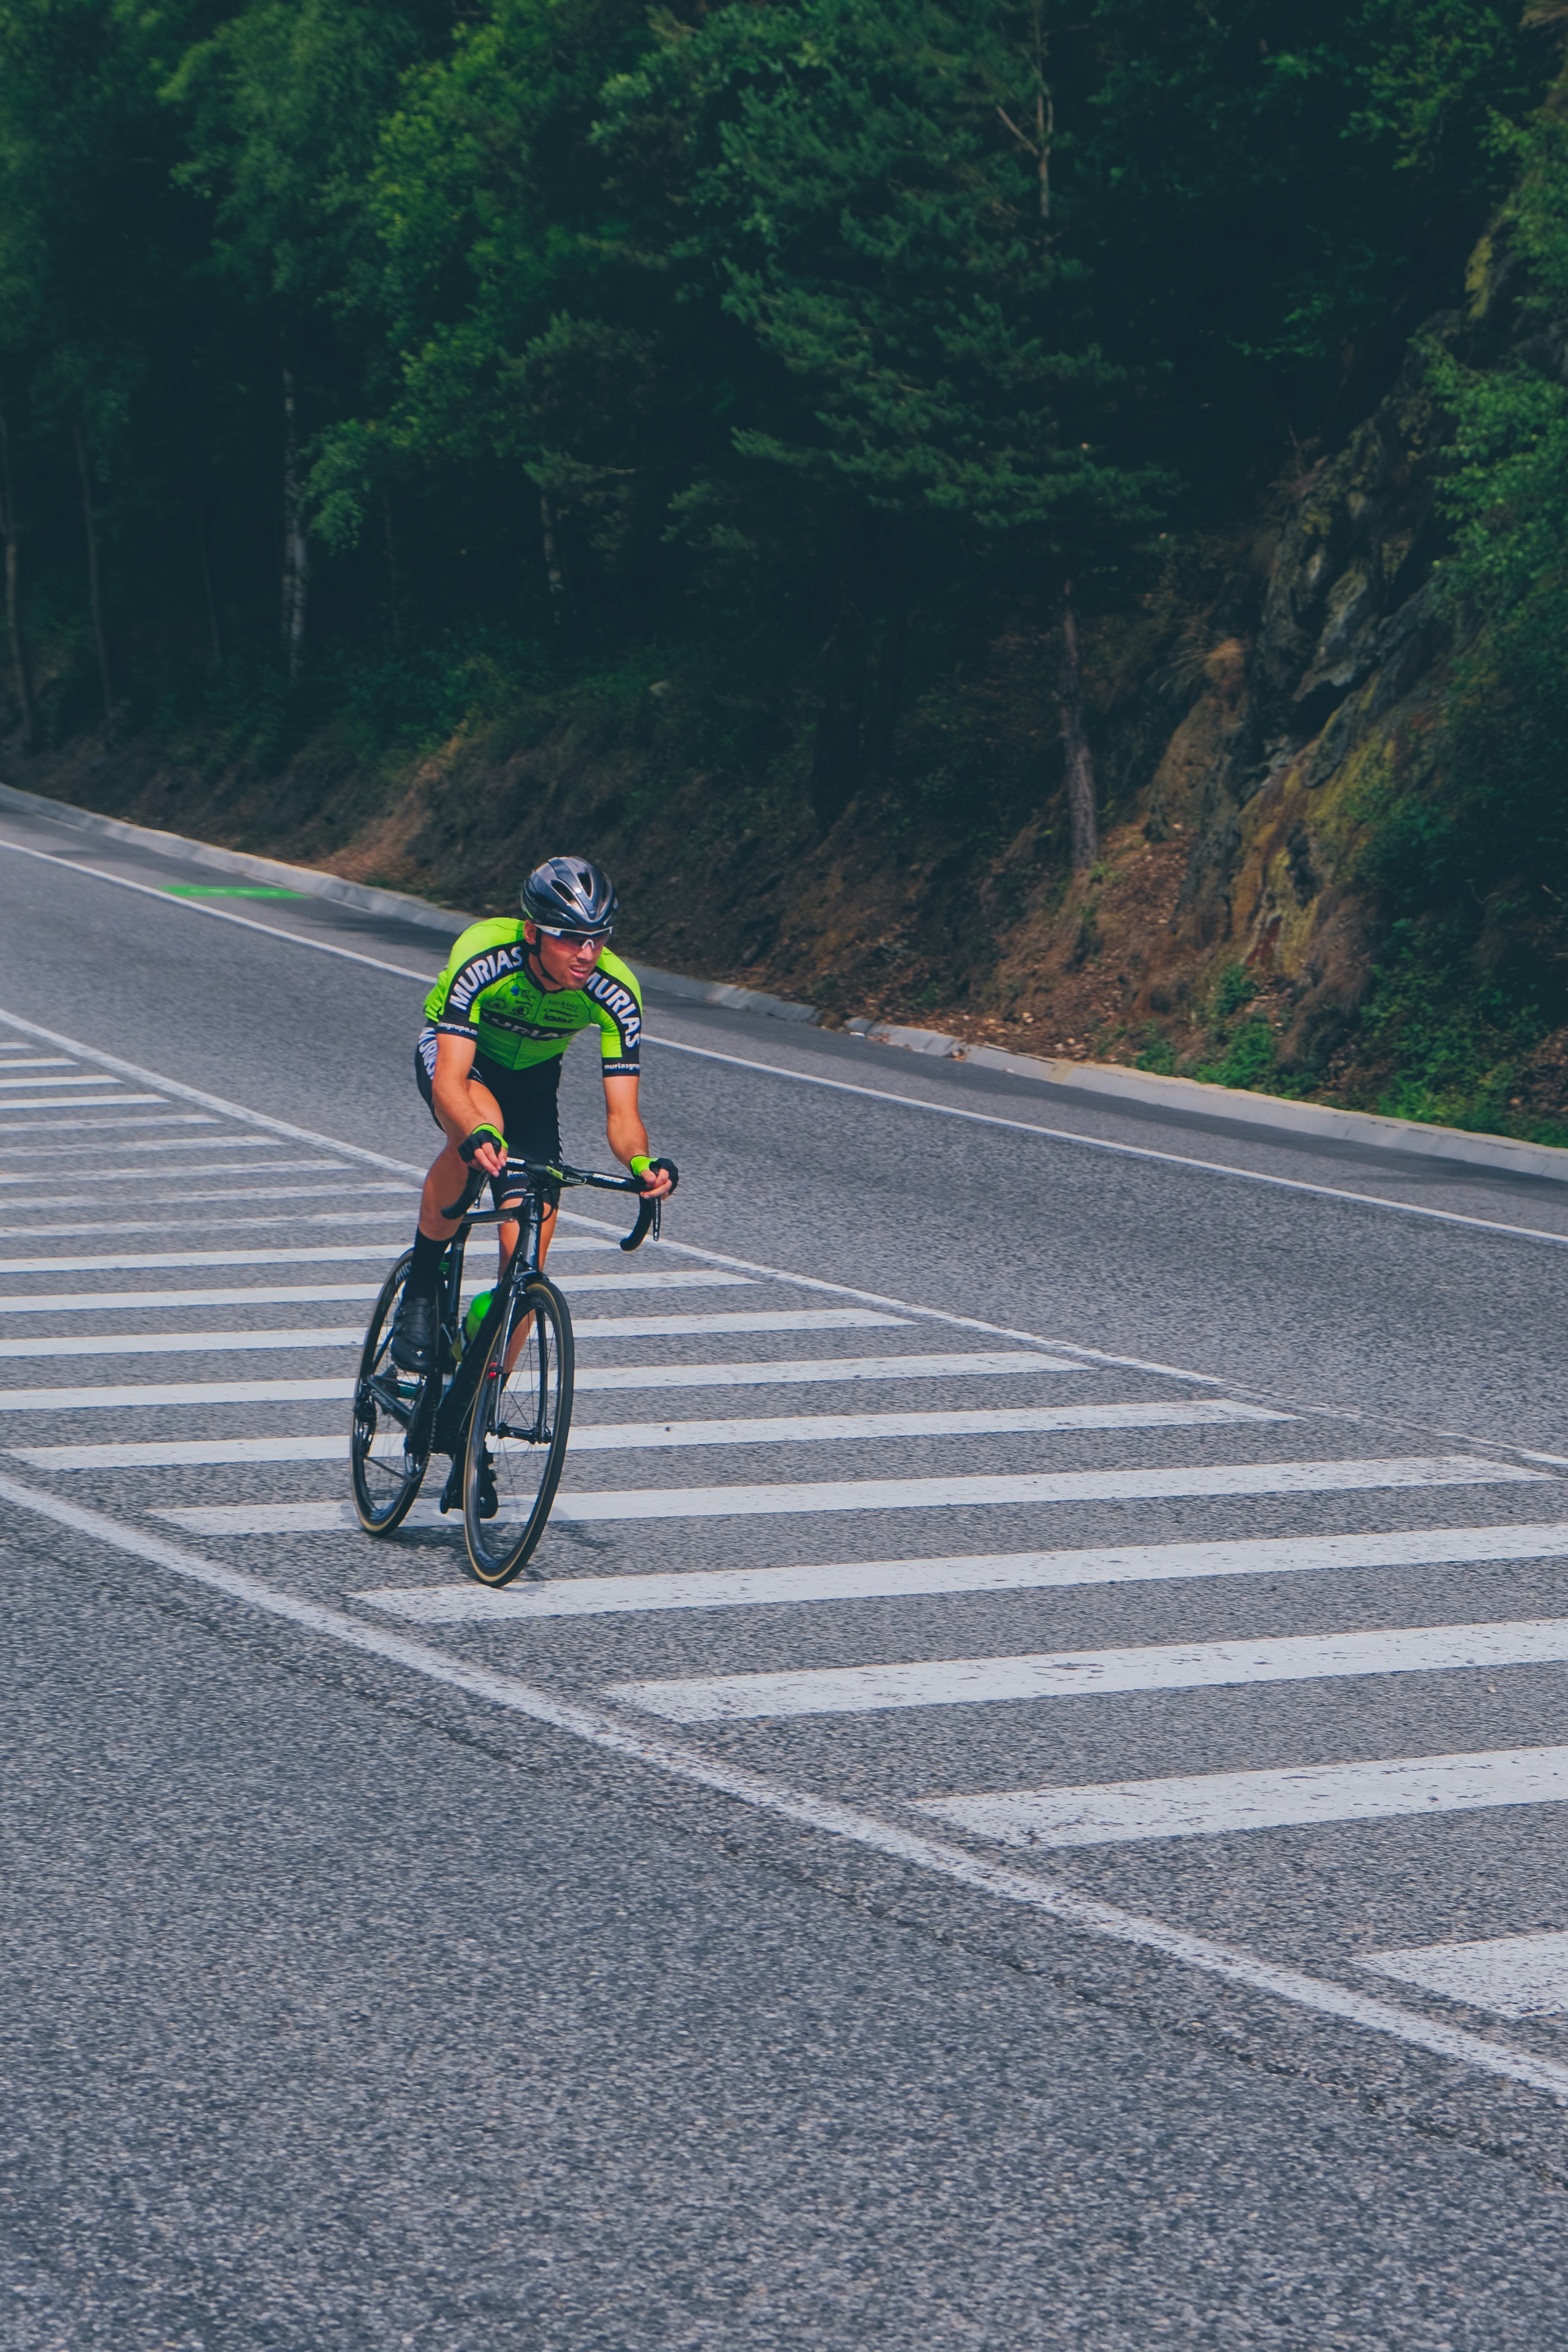 Cyril Barthe competing at the Stage 9 of La Vuelta 2019, in Andorra.